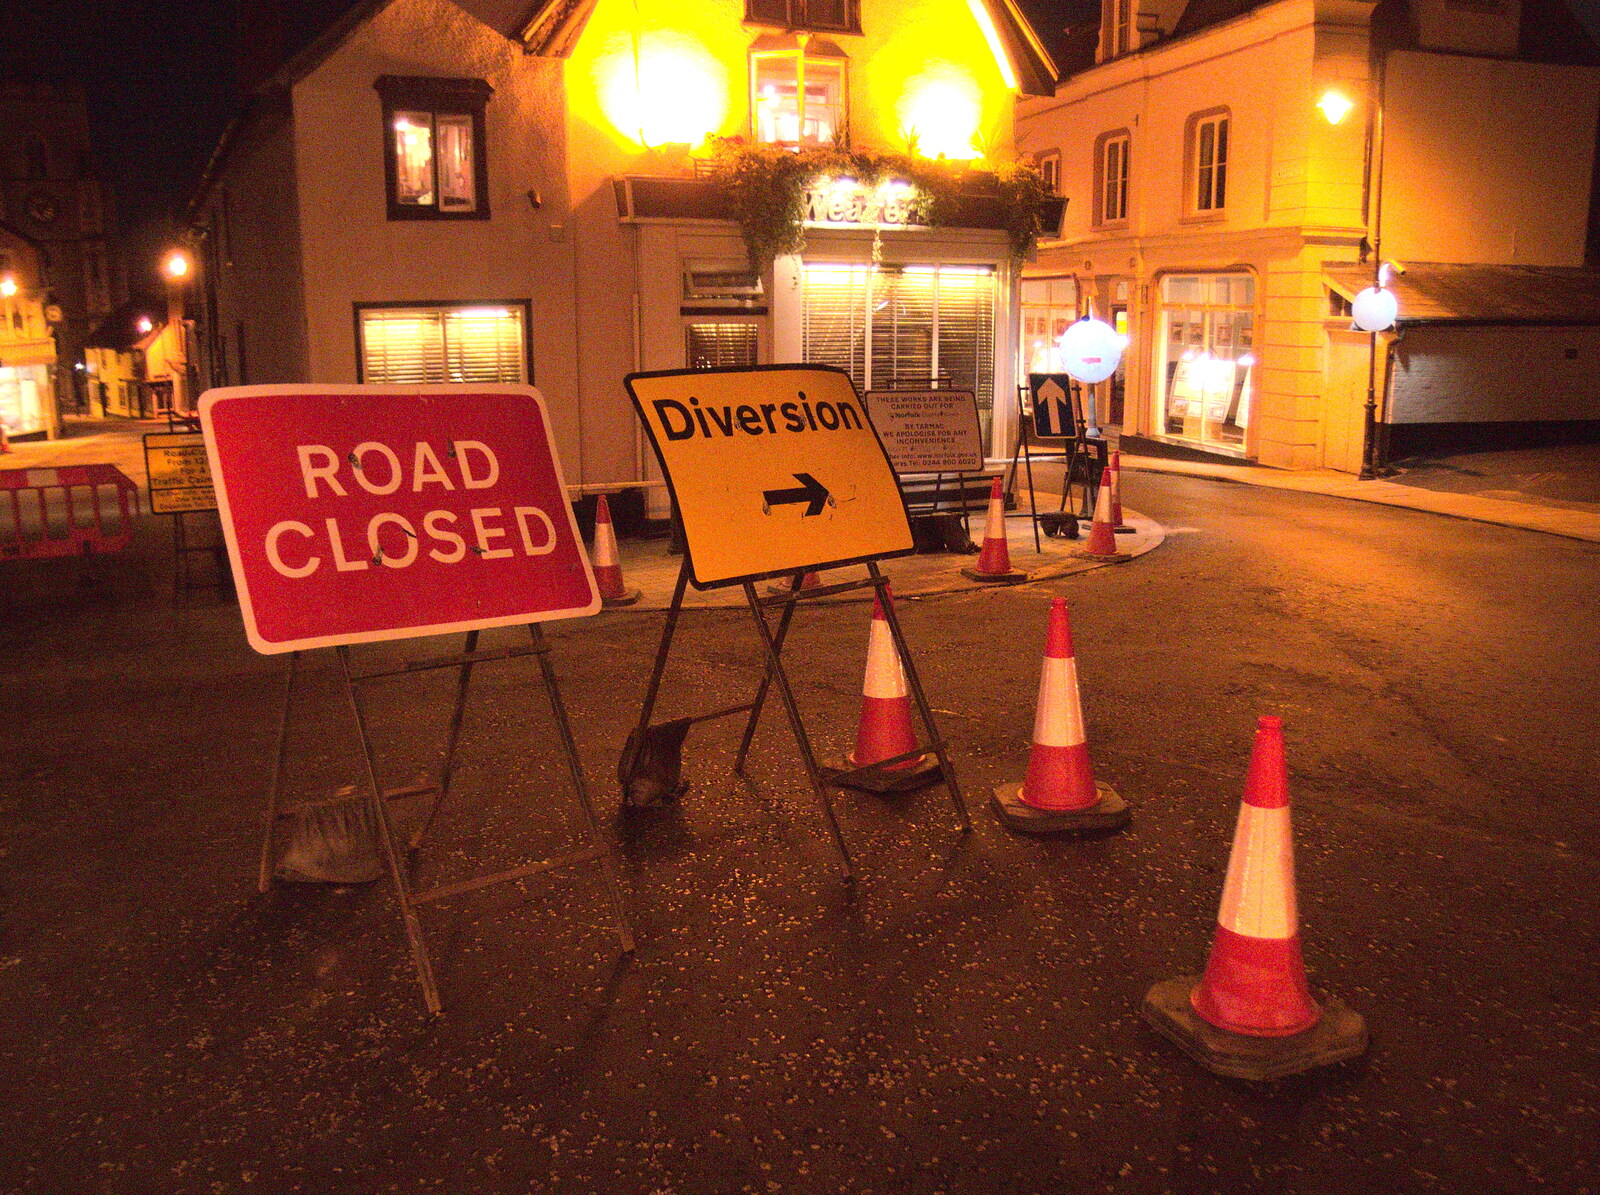 St. Nicholas Street is closed off from The BSCC at the Victoria and The Grain Beer Festival, Diss, Norfolk - 8th July 2017